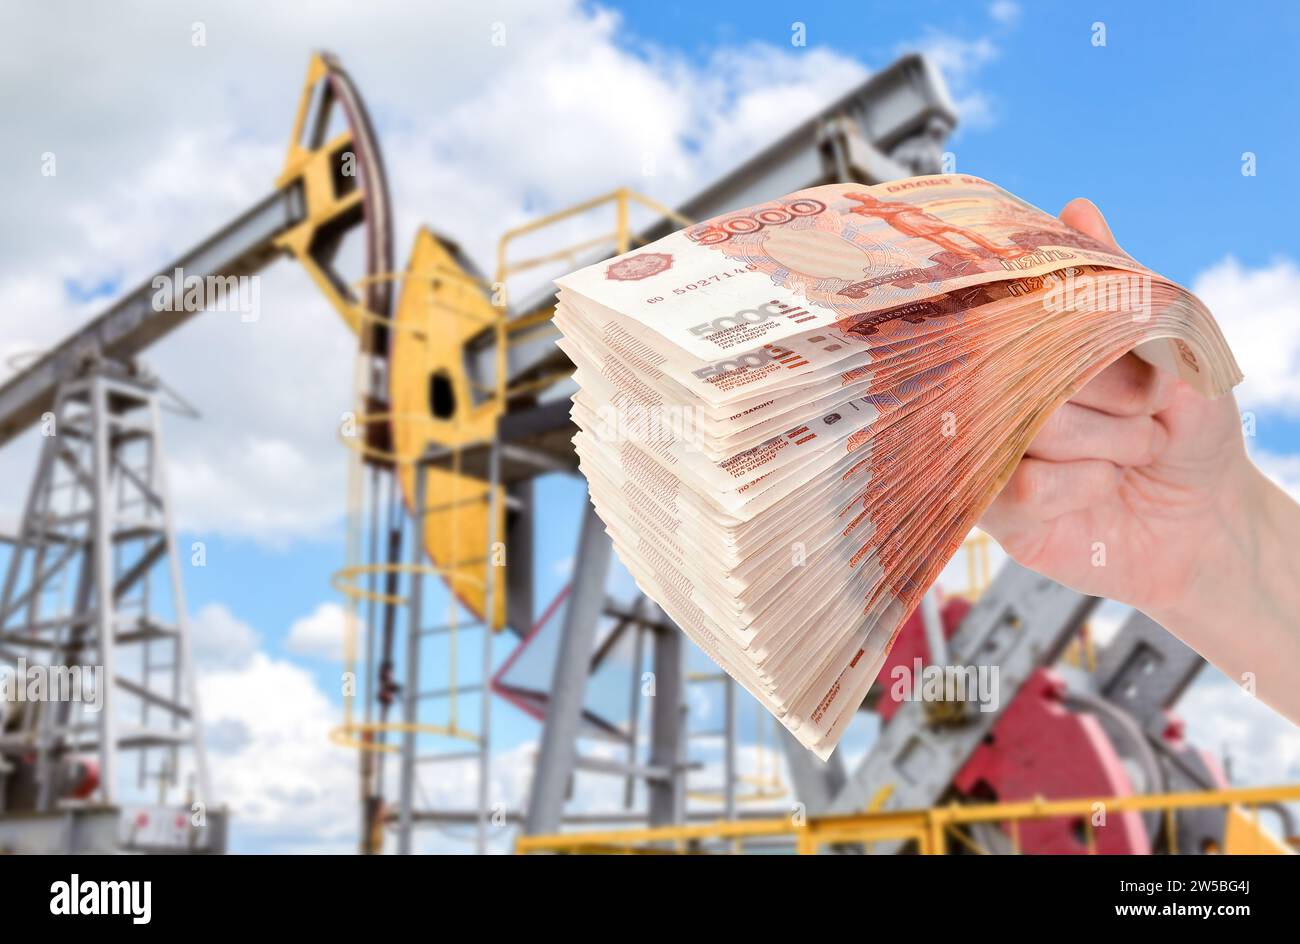 Russian roubles in the hand against the oil pump jack extraction machine. Buying and selling oil for rubles. Oil industry equipment and finace Stock Photo